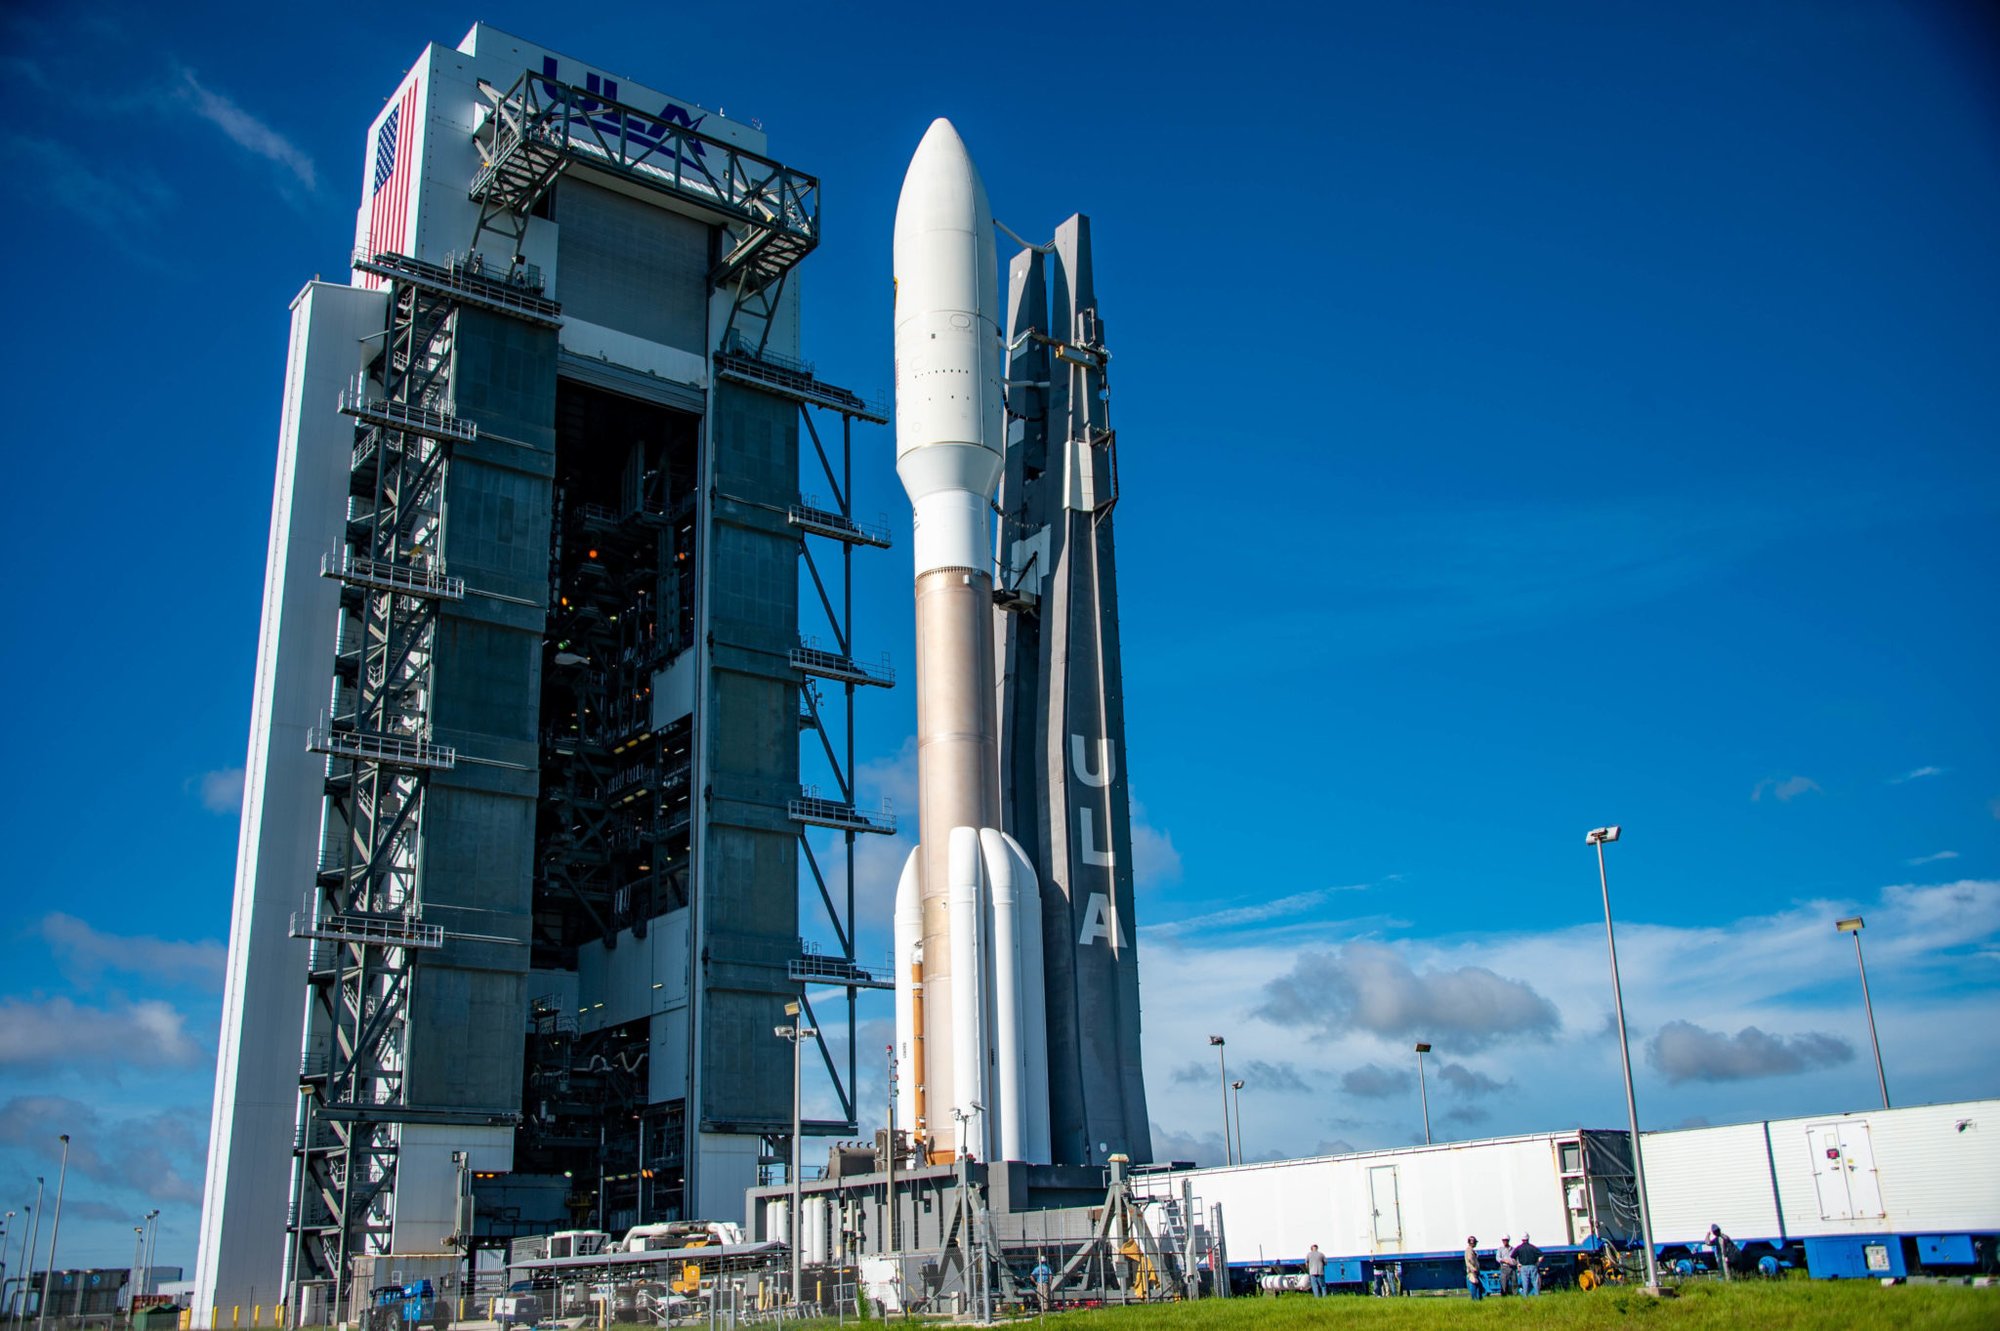 Space and Missile Systems Center’s AEHF-5 (Advanced Extreme High Frequency) encapsulated satellite mated with an Atlas V launch vehicle rolls out in preparation for launch Aug 8, 2019, at Cape Canaveral Air Force Station, Aug. 6, 2019. Photo by Van Ha/U.S. Air Force.